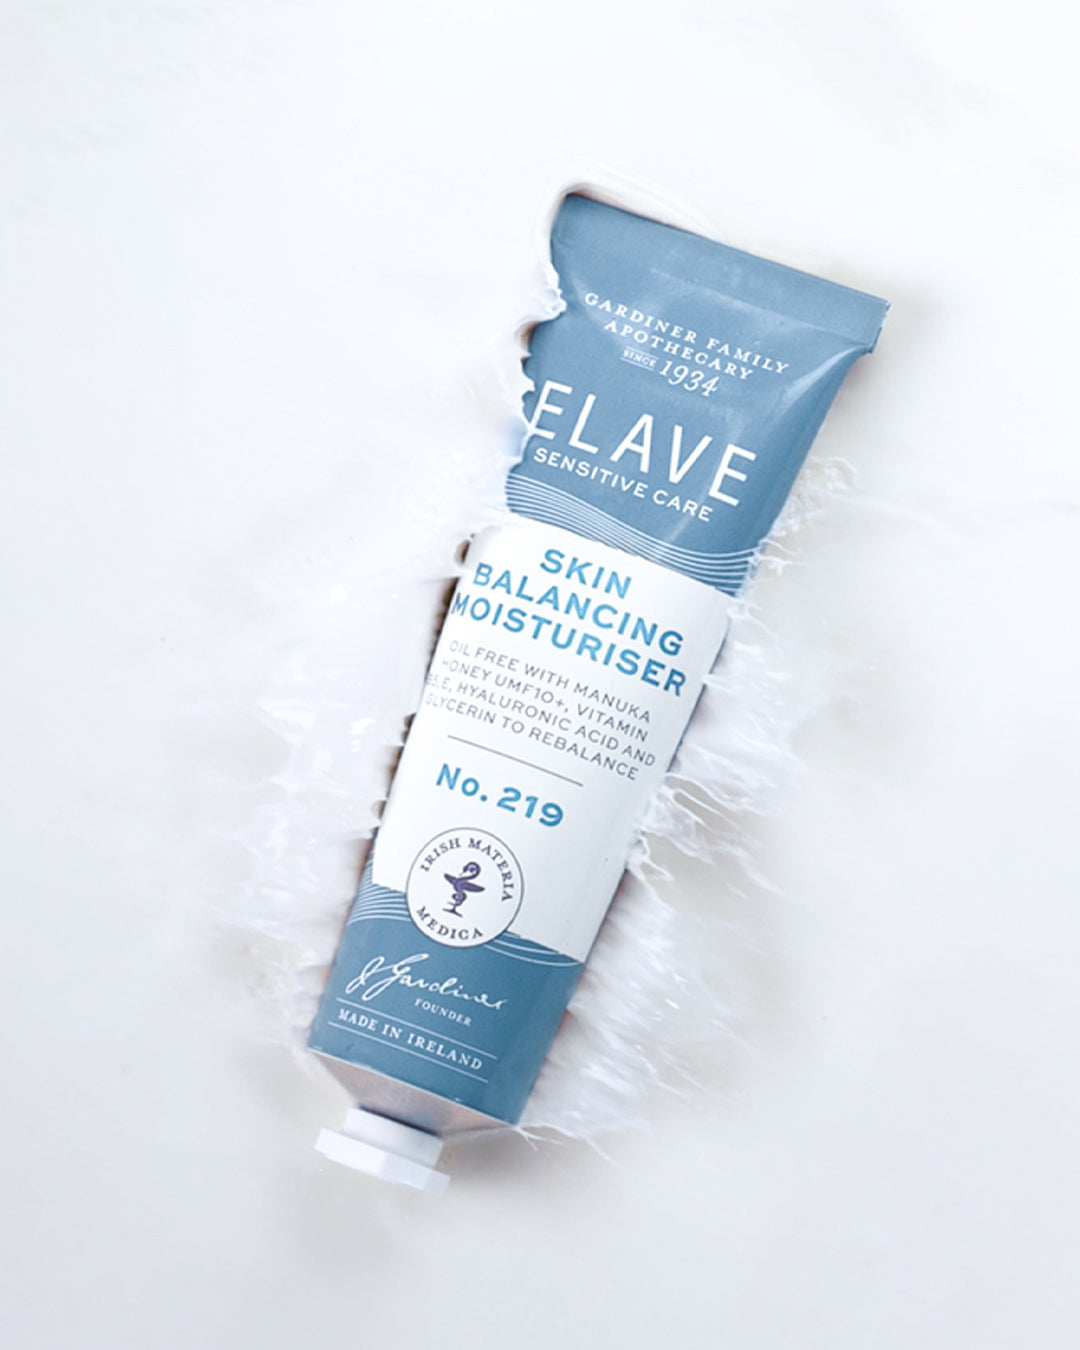 Elave Skin Balancing Moisturiser No.219 contains a multi-action formula with naturally derived prebiotics to regulate the skin’s balance, with antimicrobial Manuka Honey UMF 10+ to restore a healthier skin barrier. Anti-oxidant Vitamins B5 and E combined with natural Glycerin and Hyaluronic Acid boost the skin’s hydration levels, smoothing the appearance of fine lines and imperfections.